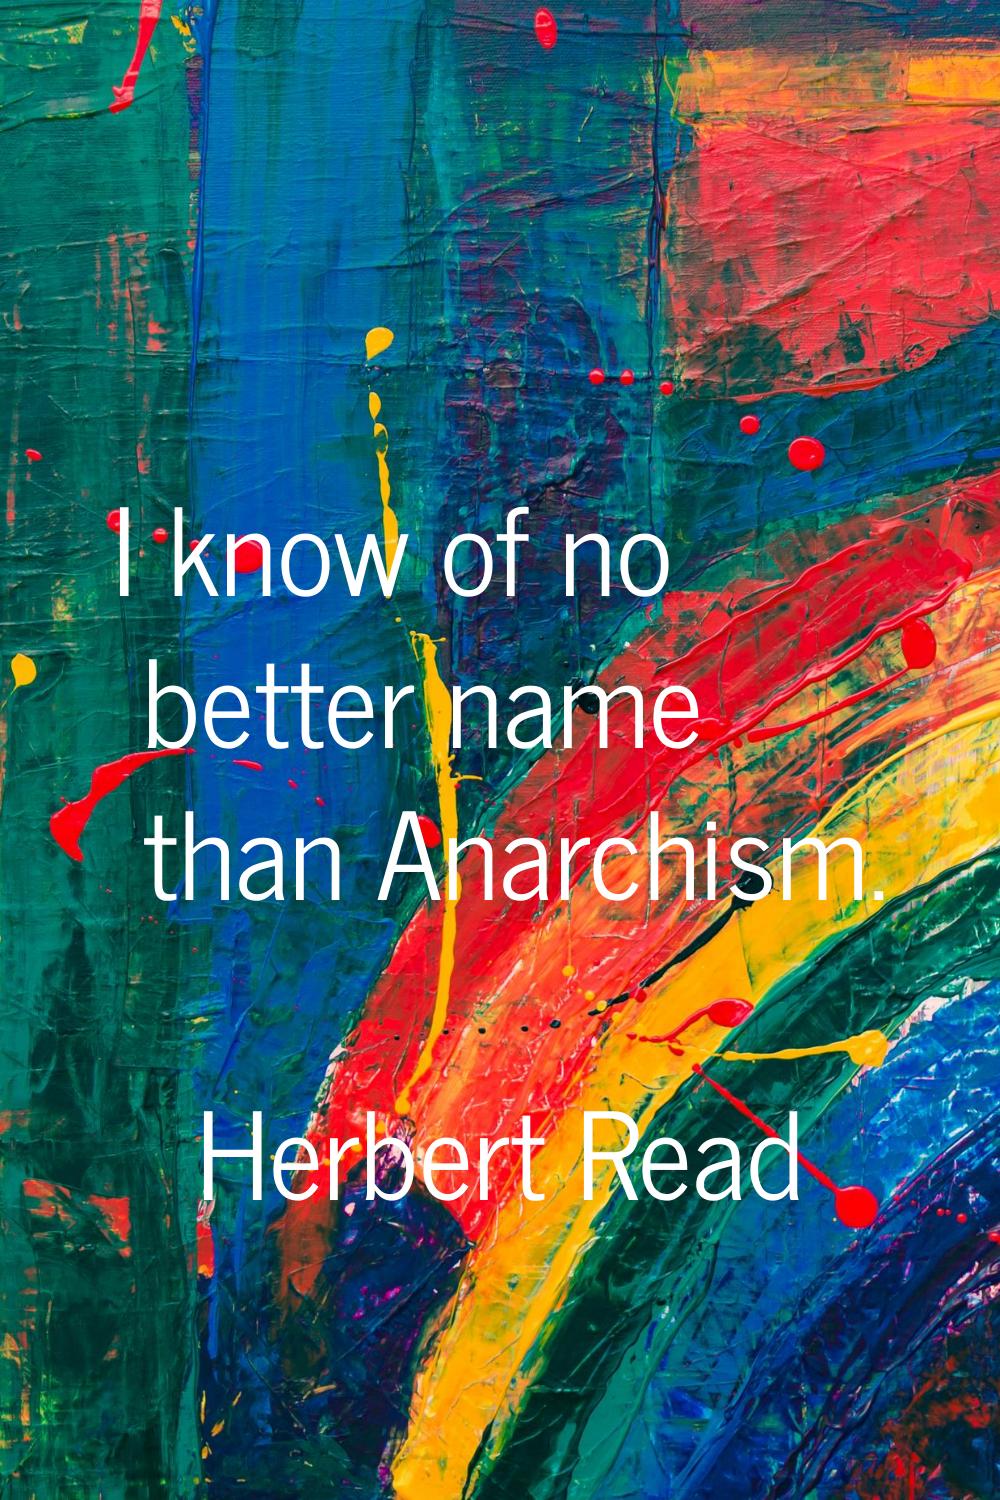 I know of no better name than Anarchism.